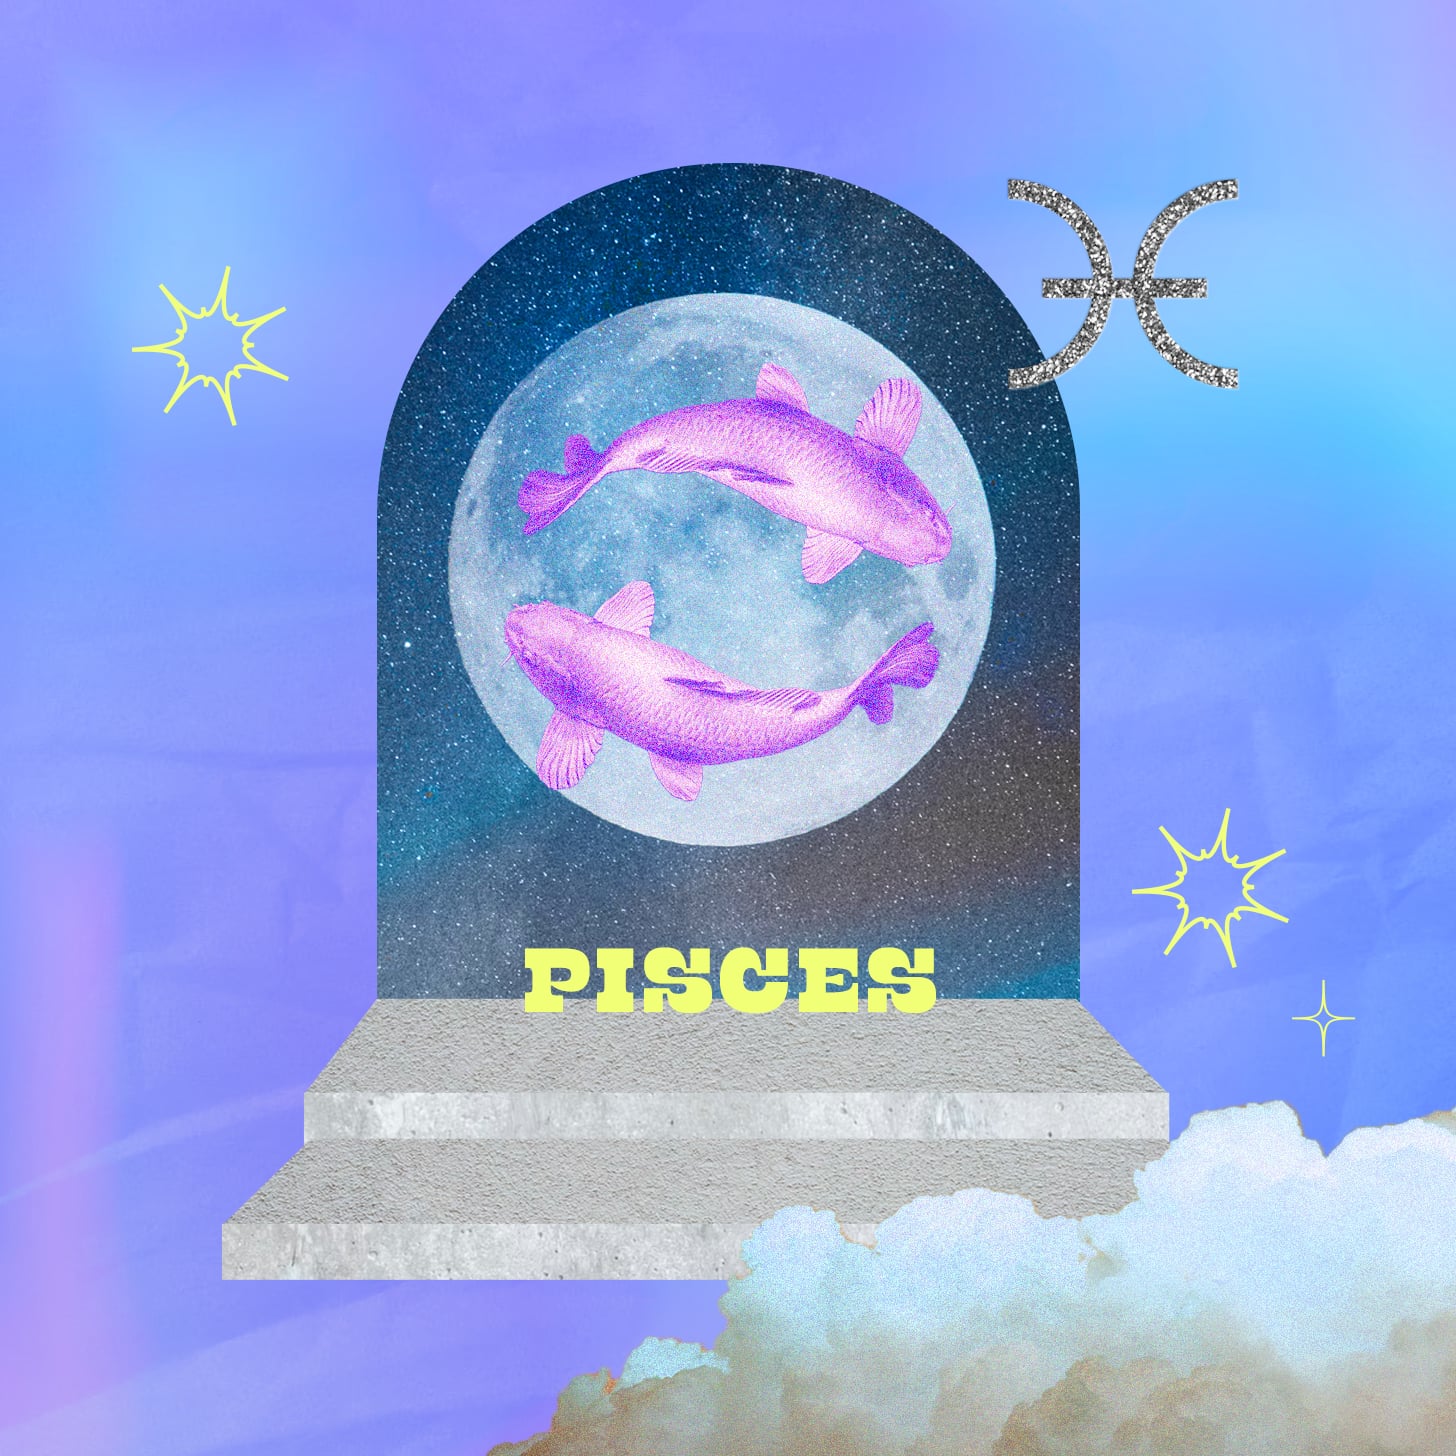 Pisces weekly horoscope for December 4, 2022